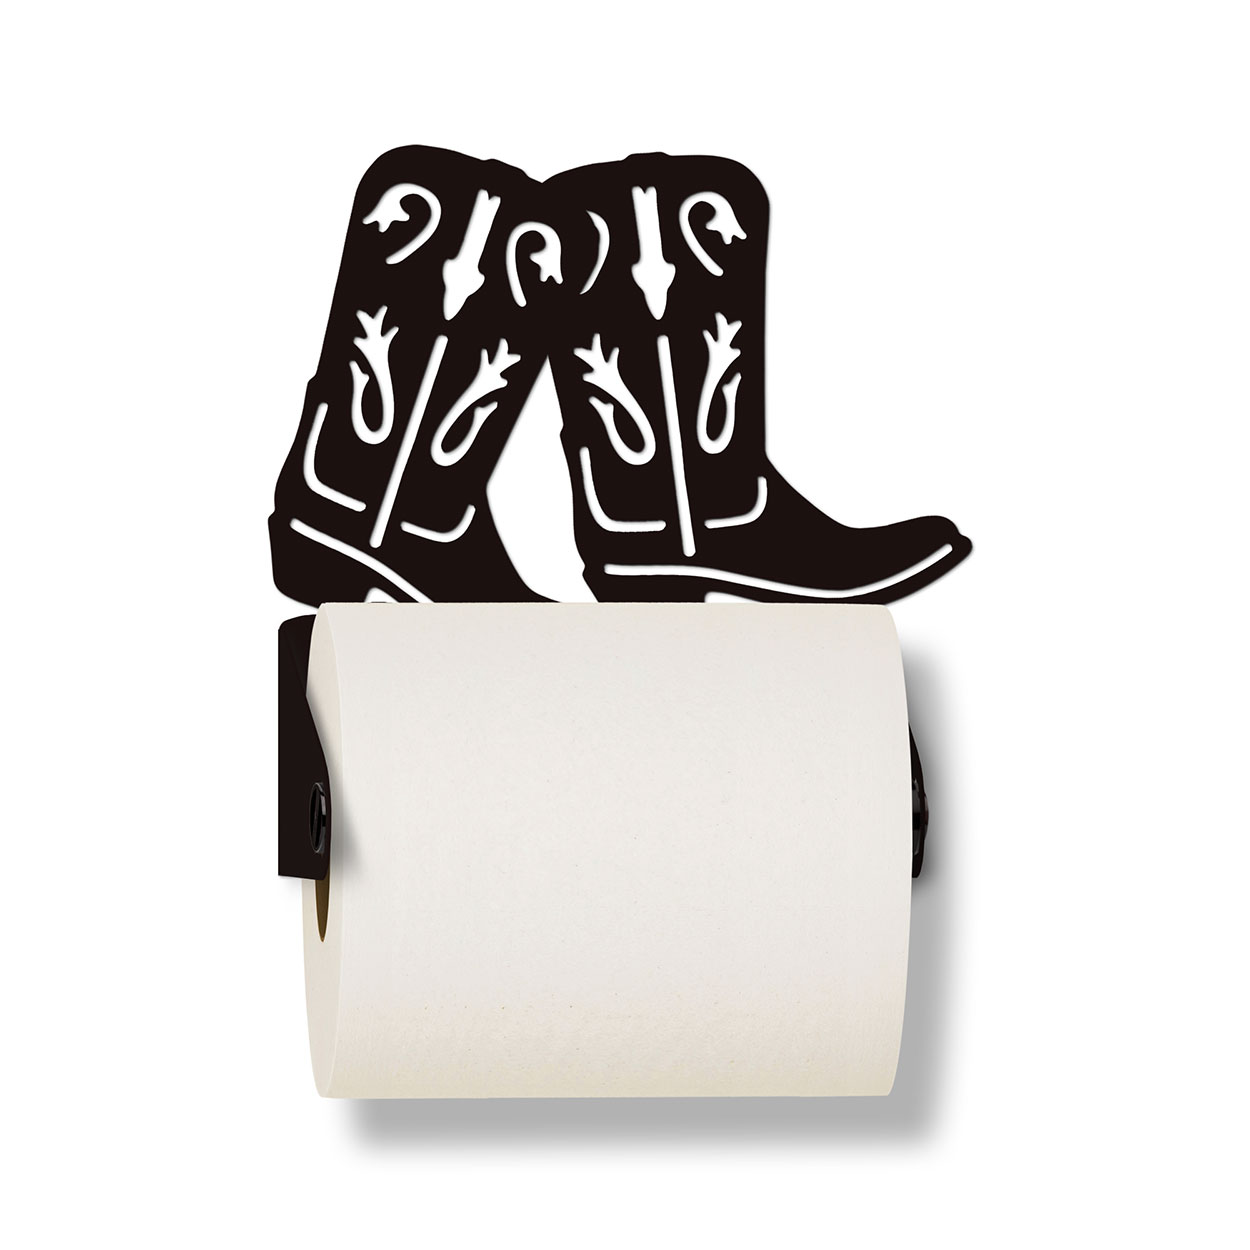 626005 - Western Theme Boots Toilet Paper Holder - Choose Color